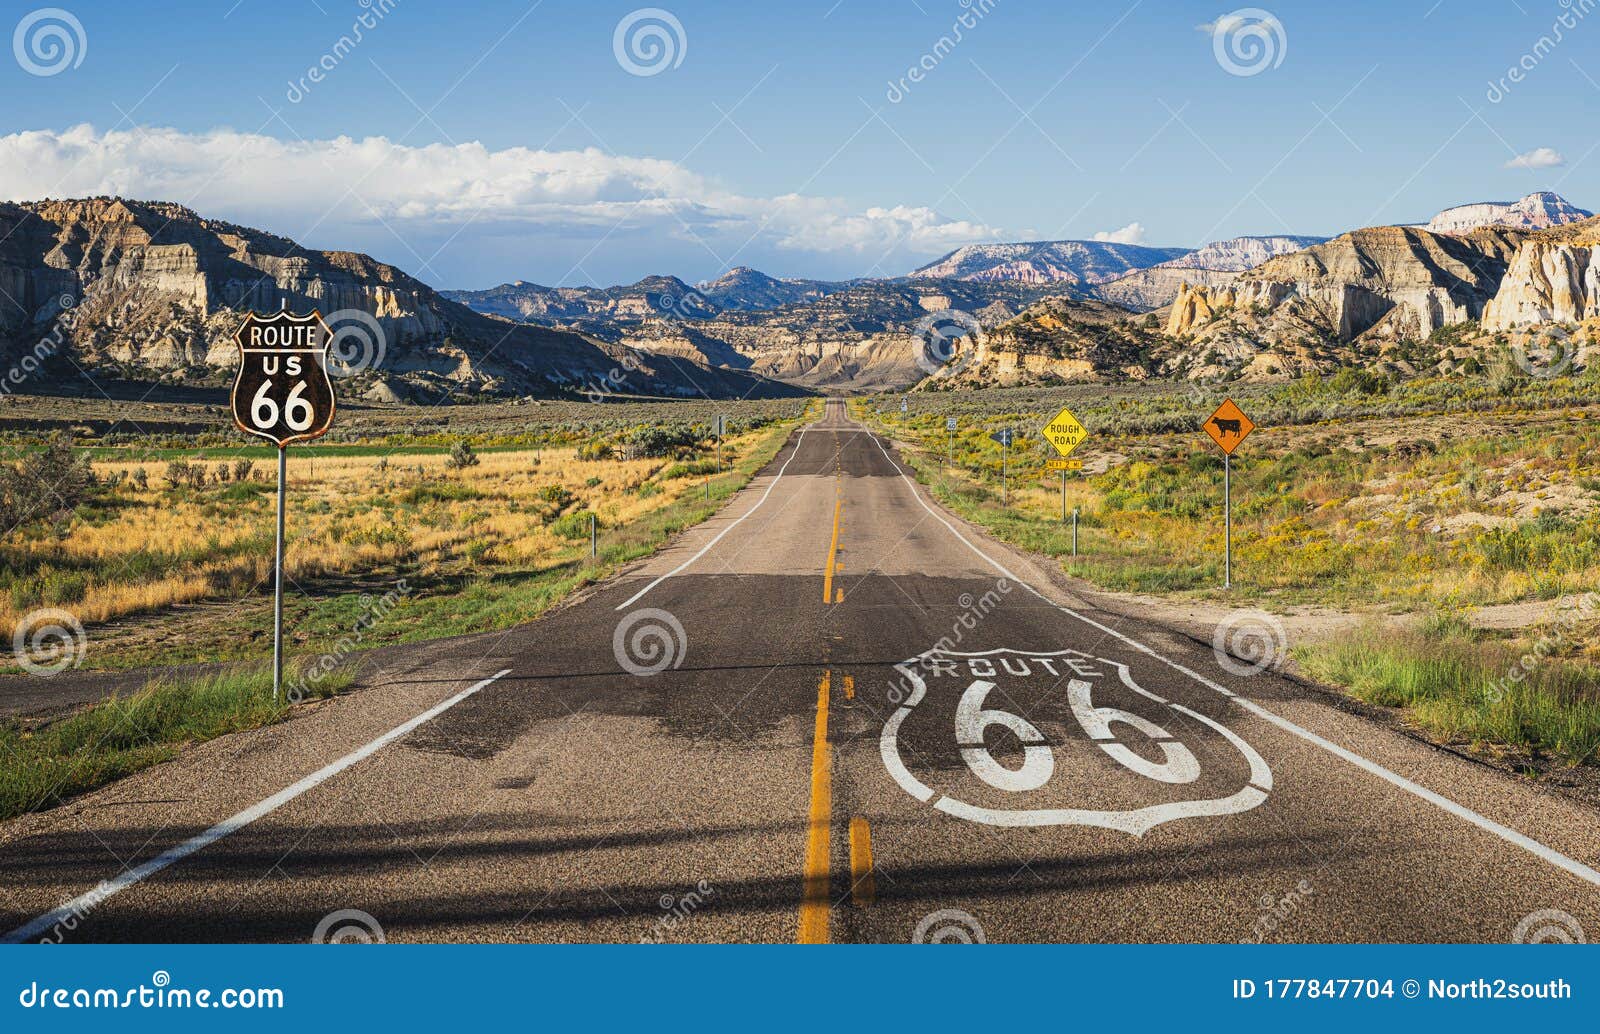 scenic view of  famous route 66 in classic american mountain scenery at sunset